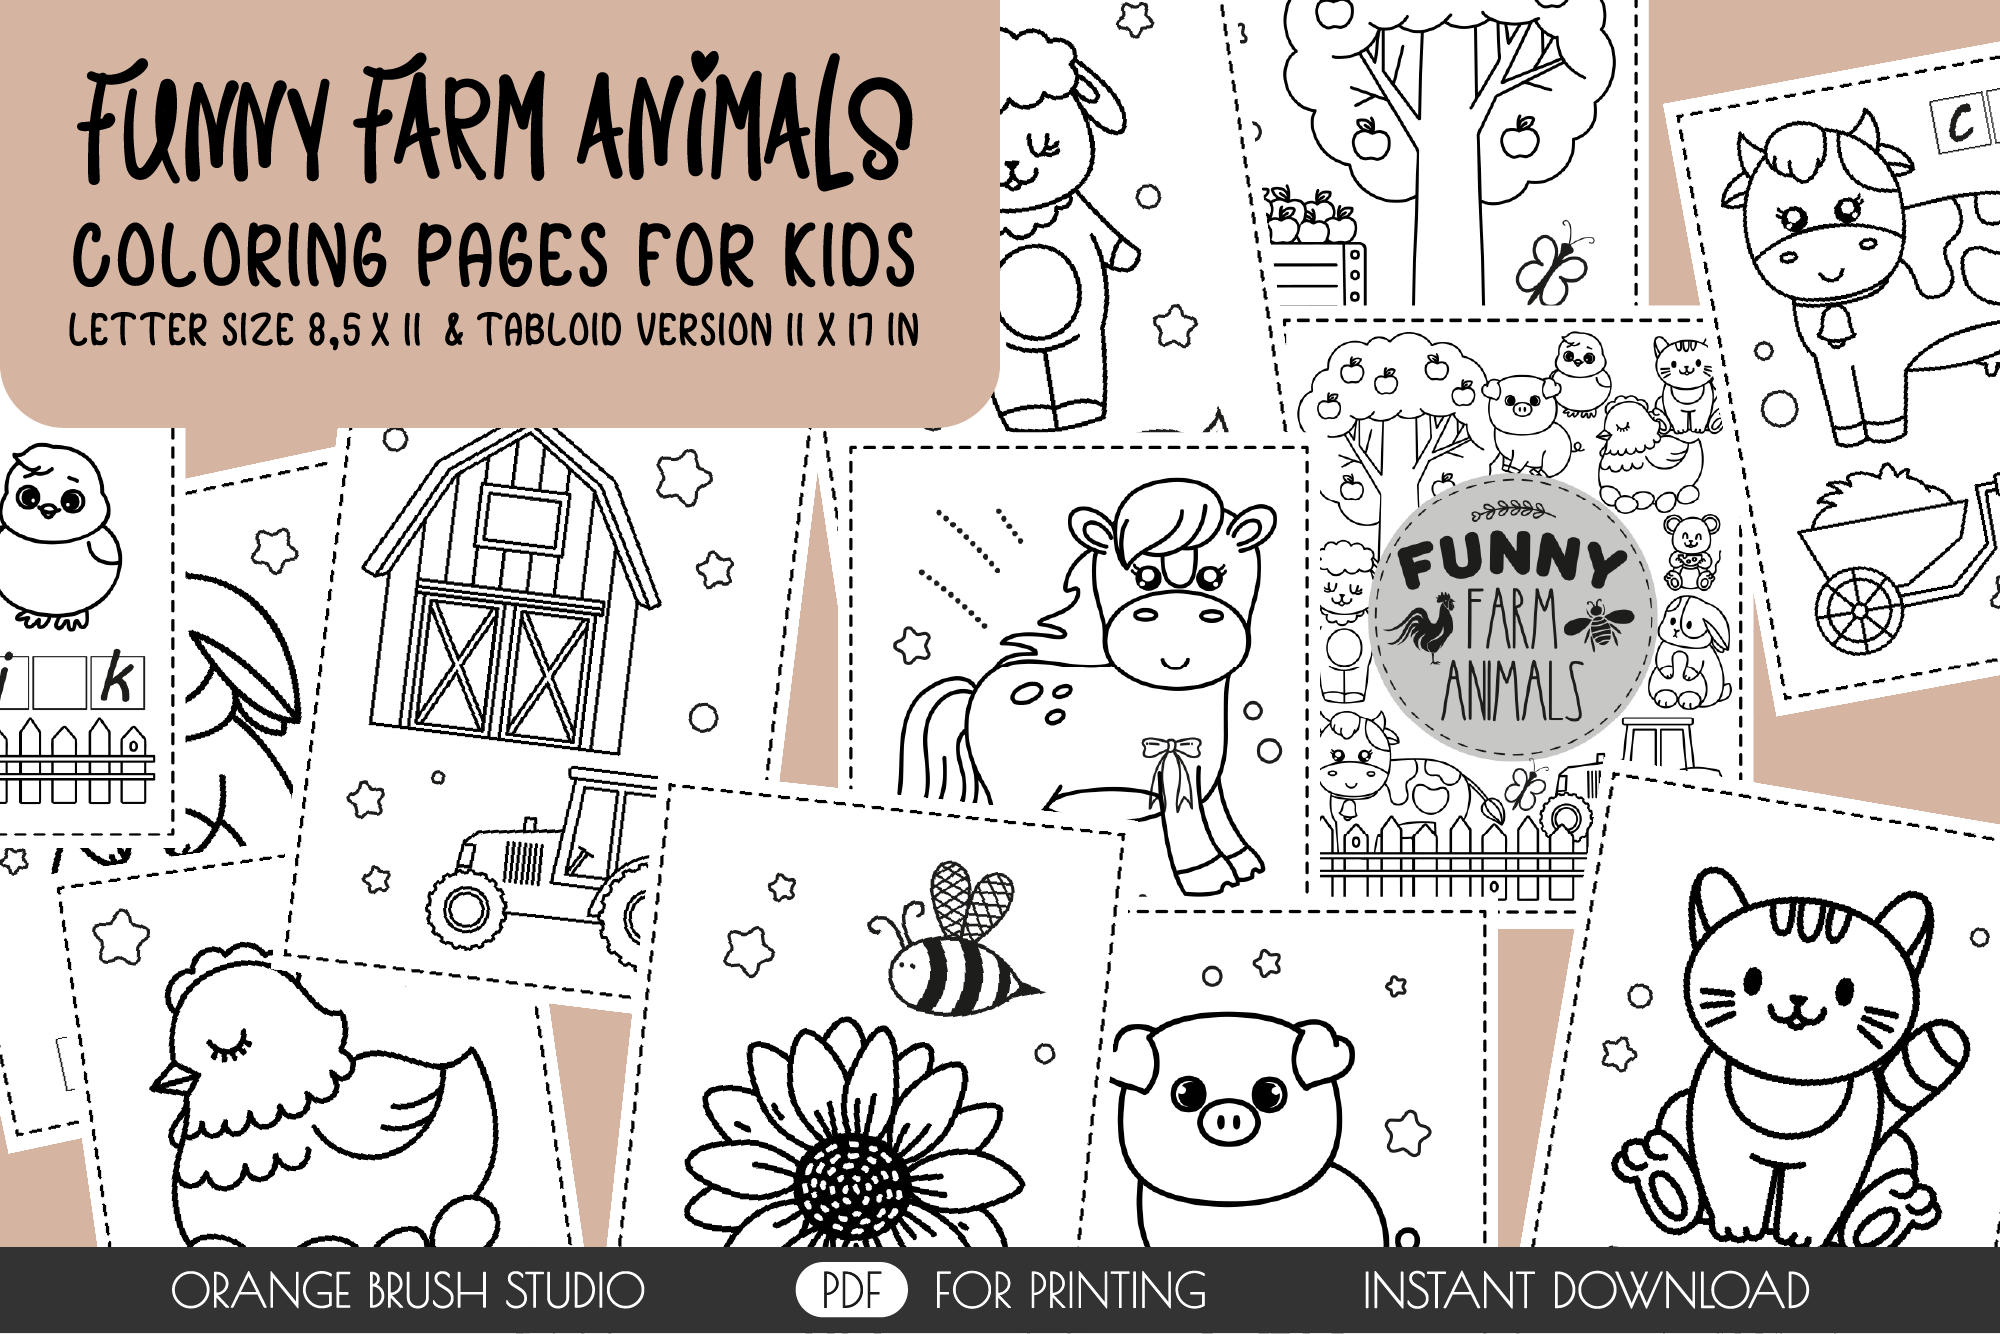 Funny cute kawaii farm animals kids activity coloring pages by orange brush studio